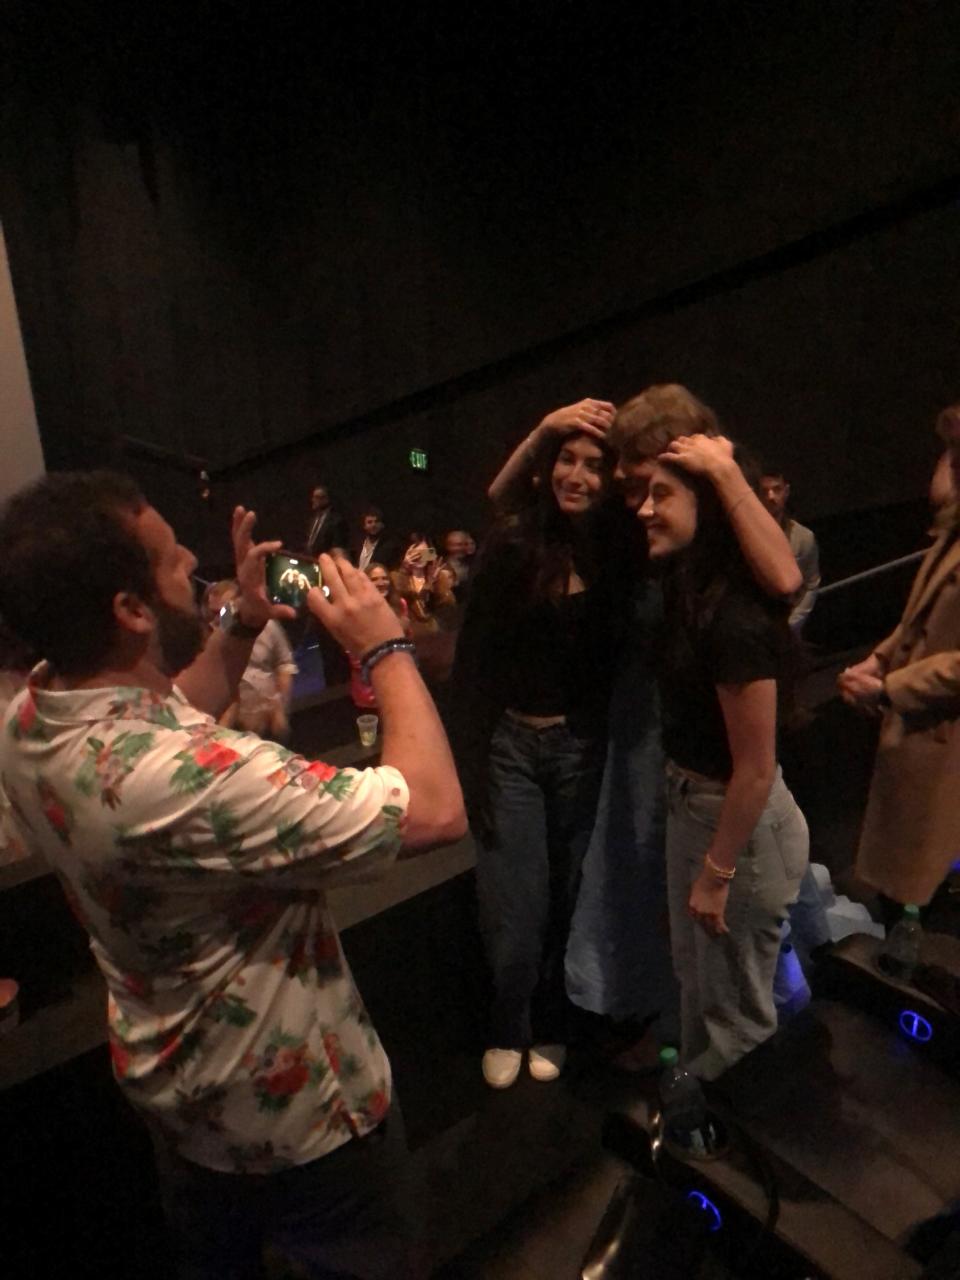 Adam Sandler takes a photo of Taylor Swift and his daughters after the world premiere of the "Era's Tour" movie.